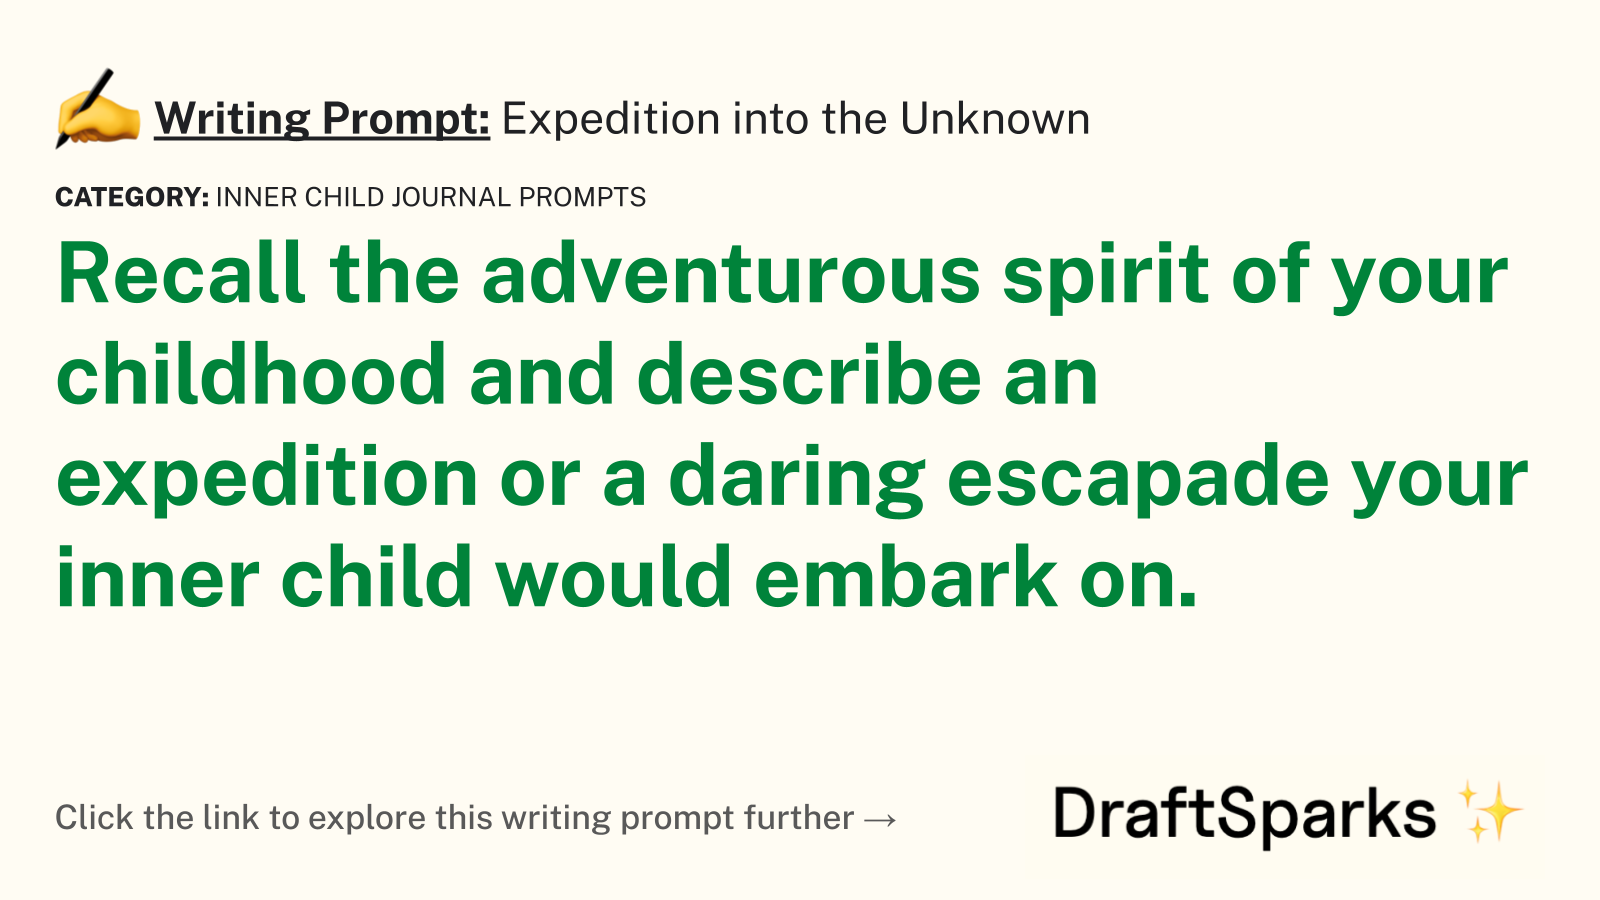 Expedition into the Unknown